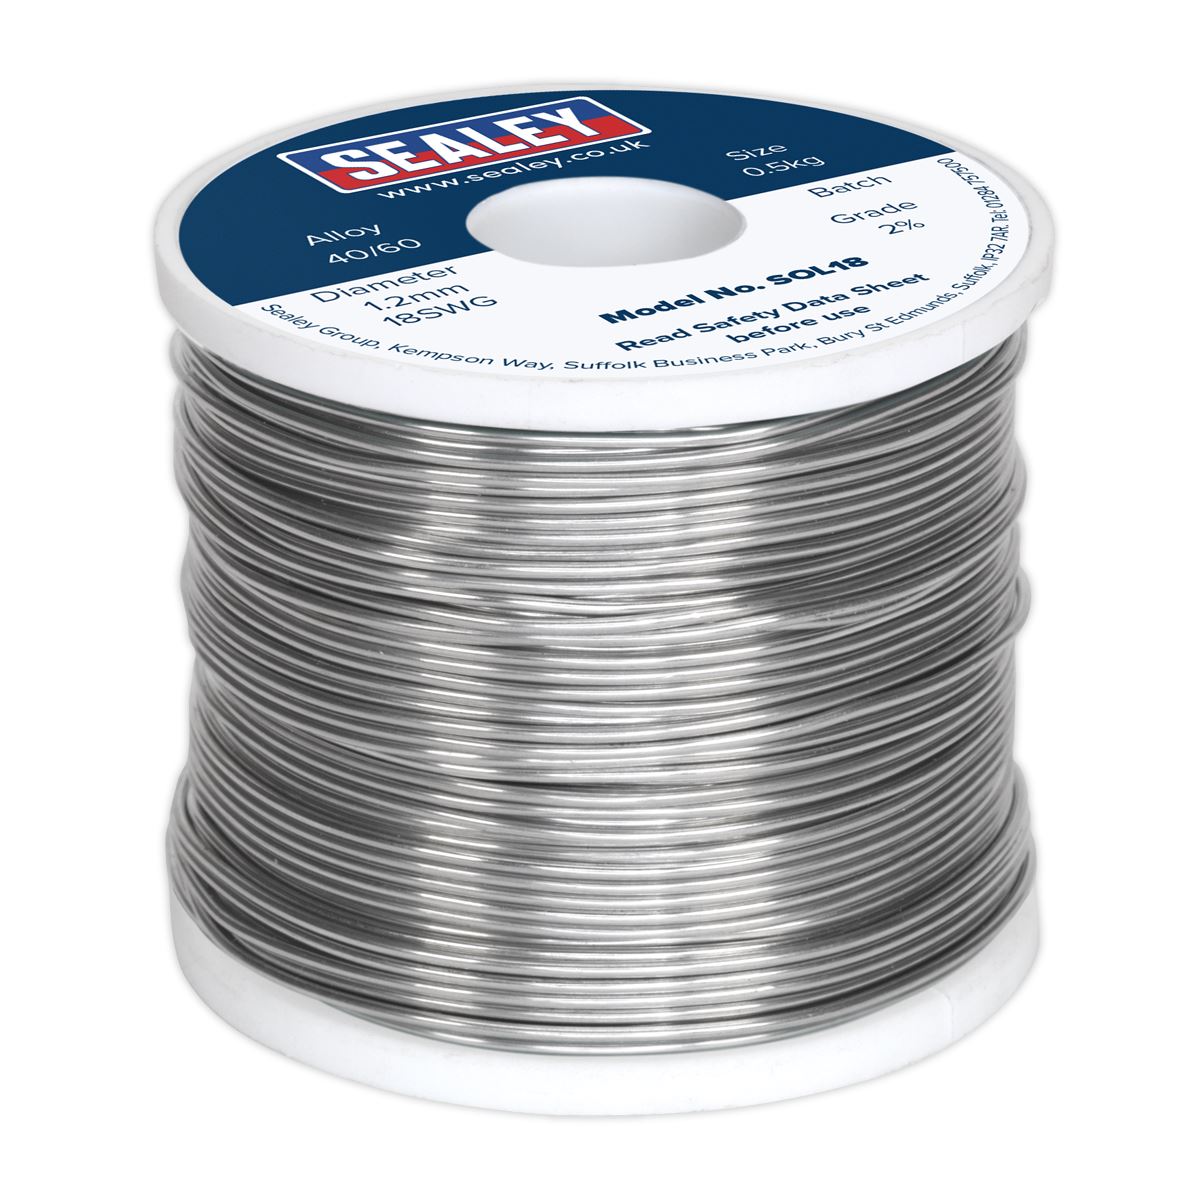 Sealey 500g Quick Flow Solder Wire 2% 40/60 Tin/Lead